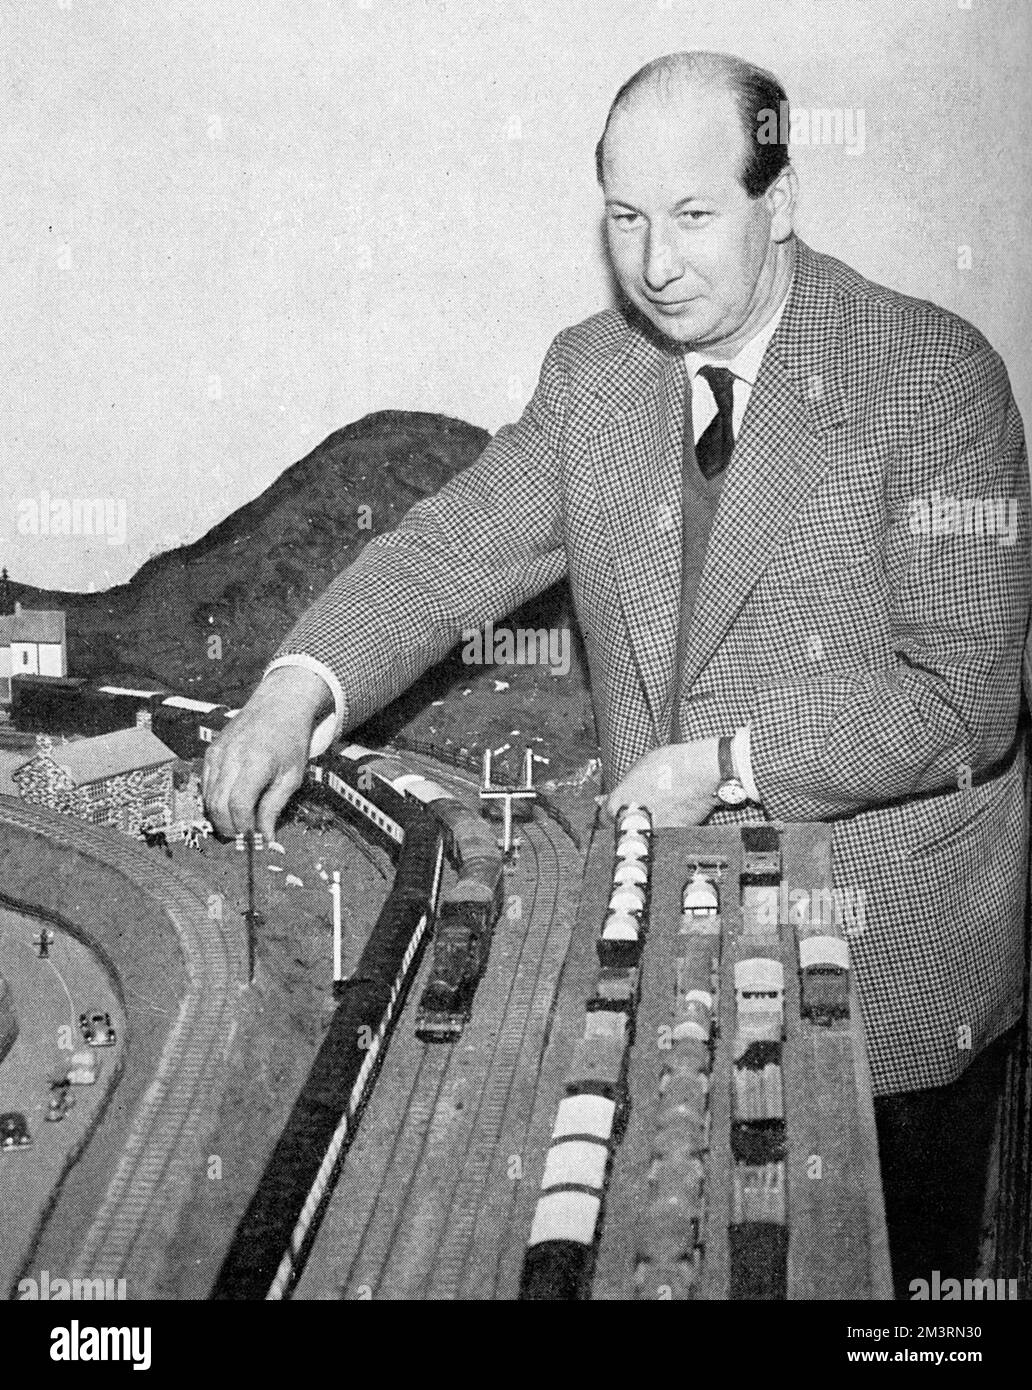 Denis Anthony Brian Butler, 9th Earl of Lanesborough (28 October 1918  27 December 1998), Irish aristocrat pictured with the large model-railway he had set up in his home, Swithland Hall.  A railway enthusiast, he applied to British Rail to be a train driver but was unsuccessful!       Date: 1958 Stock Photo